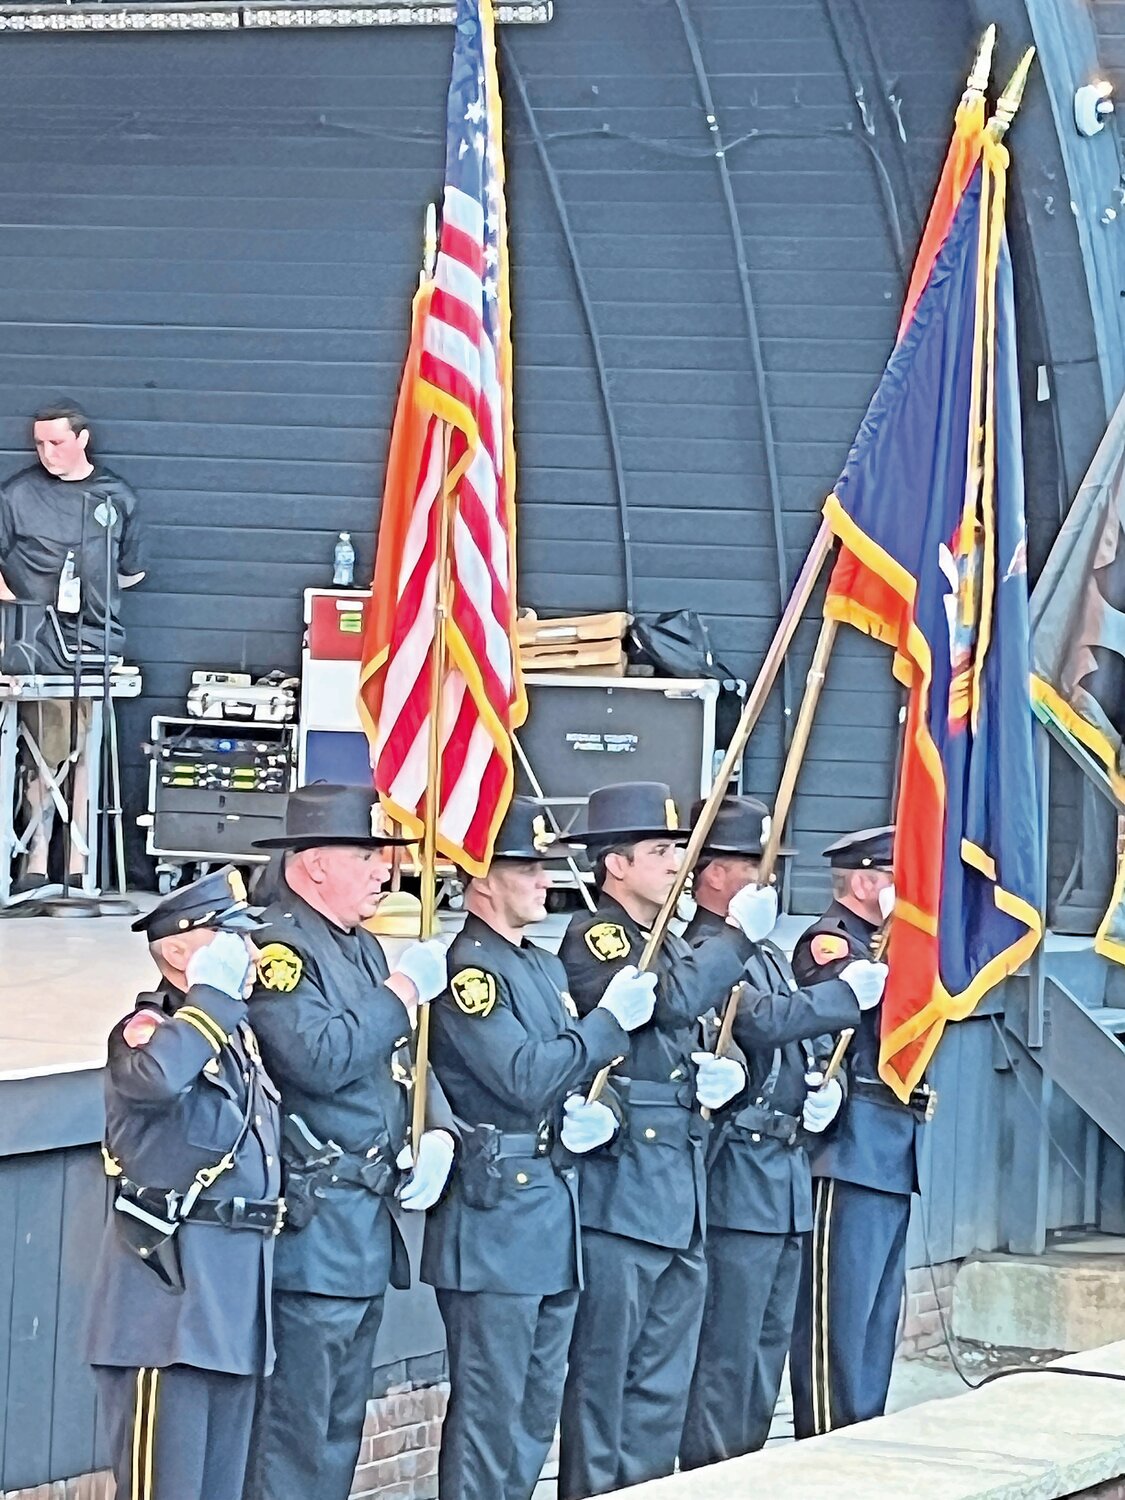 The Nassau County Police Department Color Guard and the Nassau County Sheriff’s Department Honor Guard present the colors for the ‘Star-Spangled Banner’ at Nassau County’s 9/11 Remembrance Ceremony at Eisenhower Park on Monday.